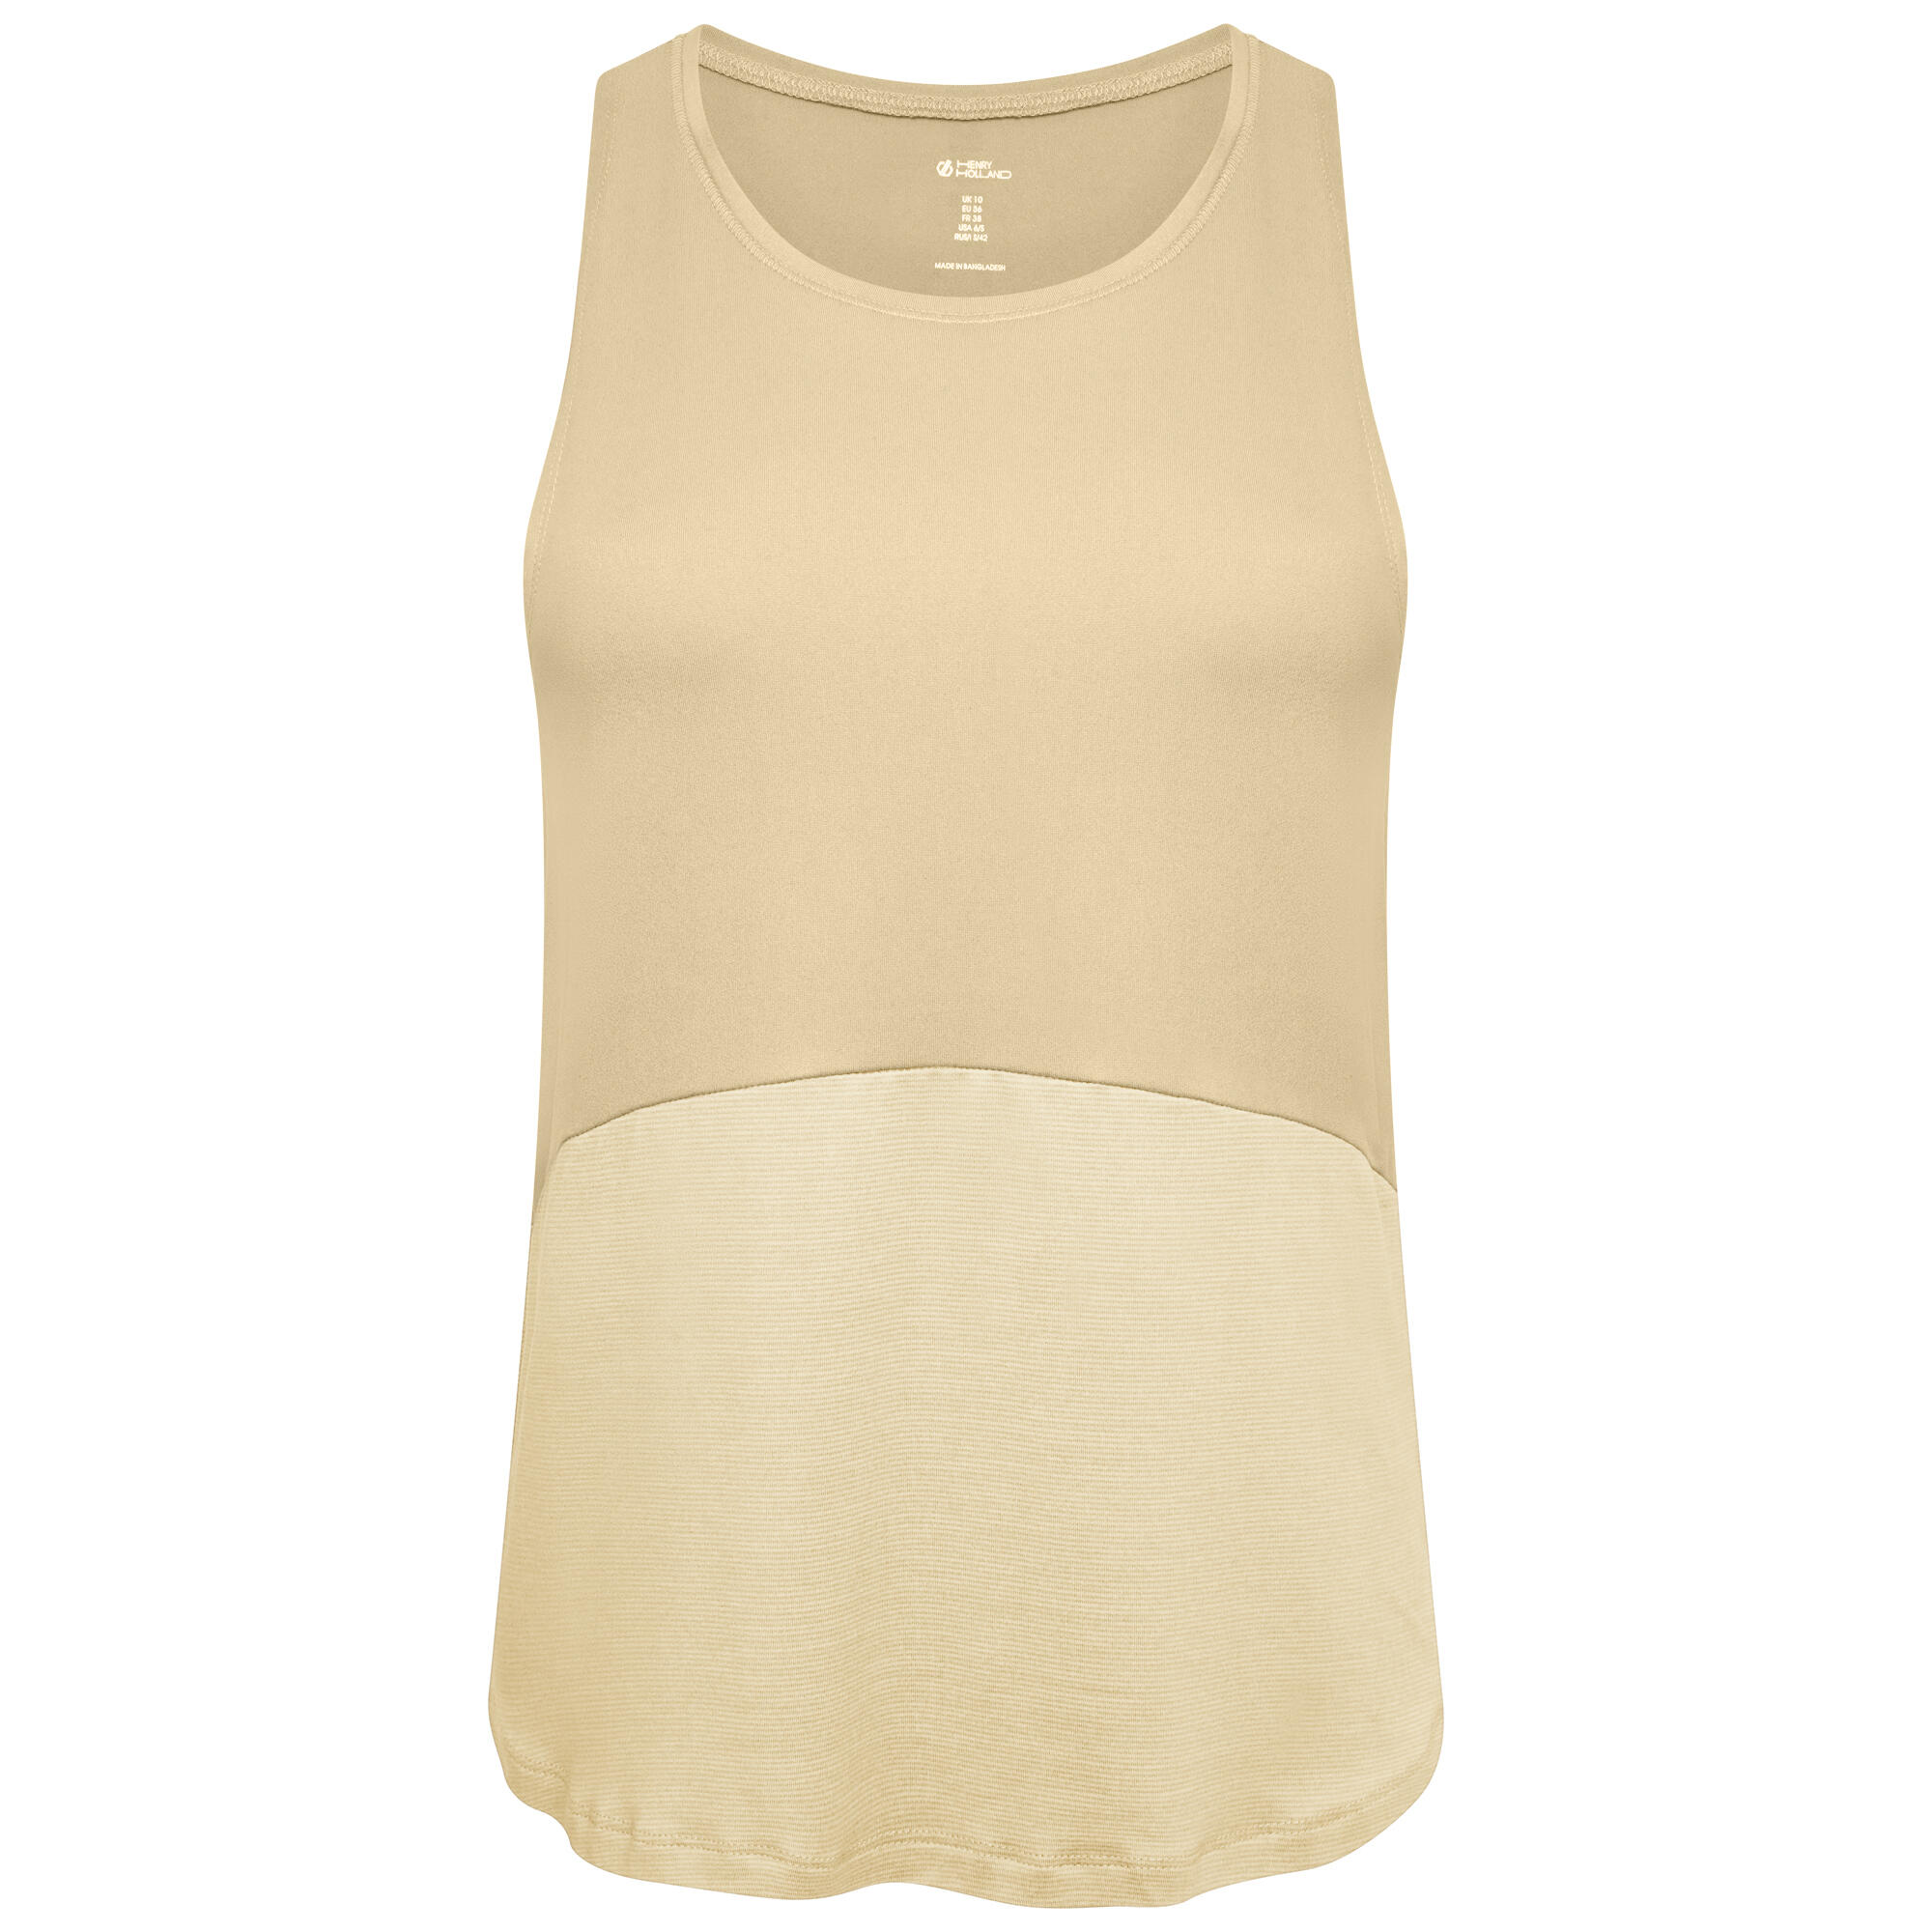 Henry Holland Cut Loose Womens Gym Vest - Green 1/5